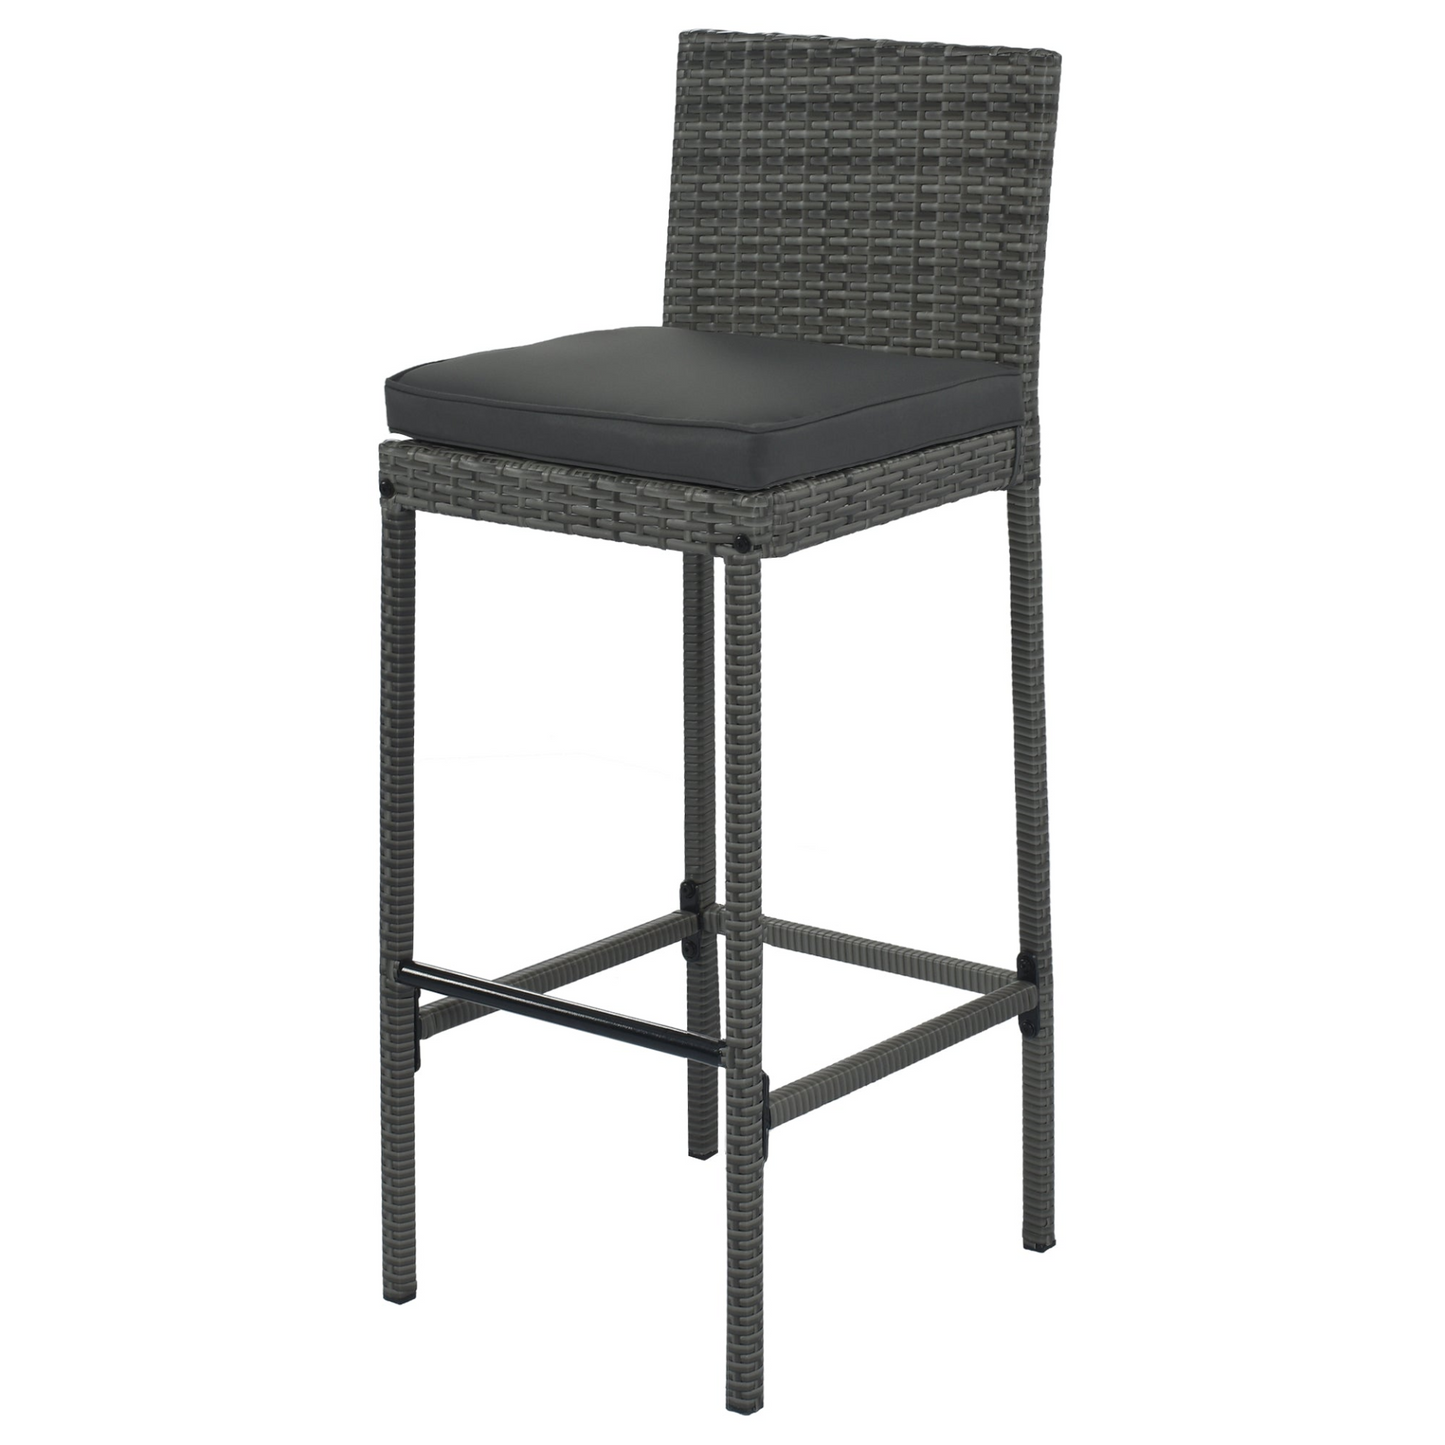 Outdoor Patio Wicker Bar Set, Bar Height Chairs w/Non-Slip Feet and Fixed Rope, Removable Cushion, Acacia Wood Table Top, Brown Wood And Gray Wicker -5 pcs.